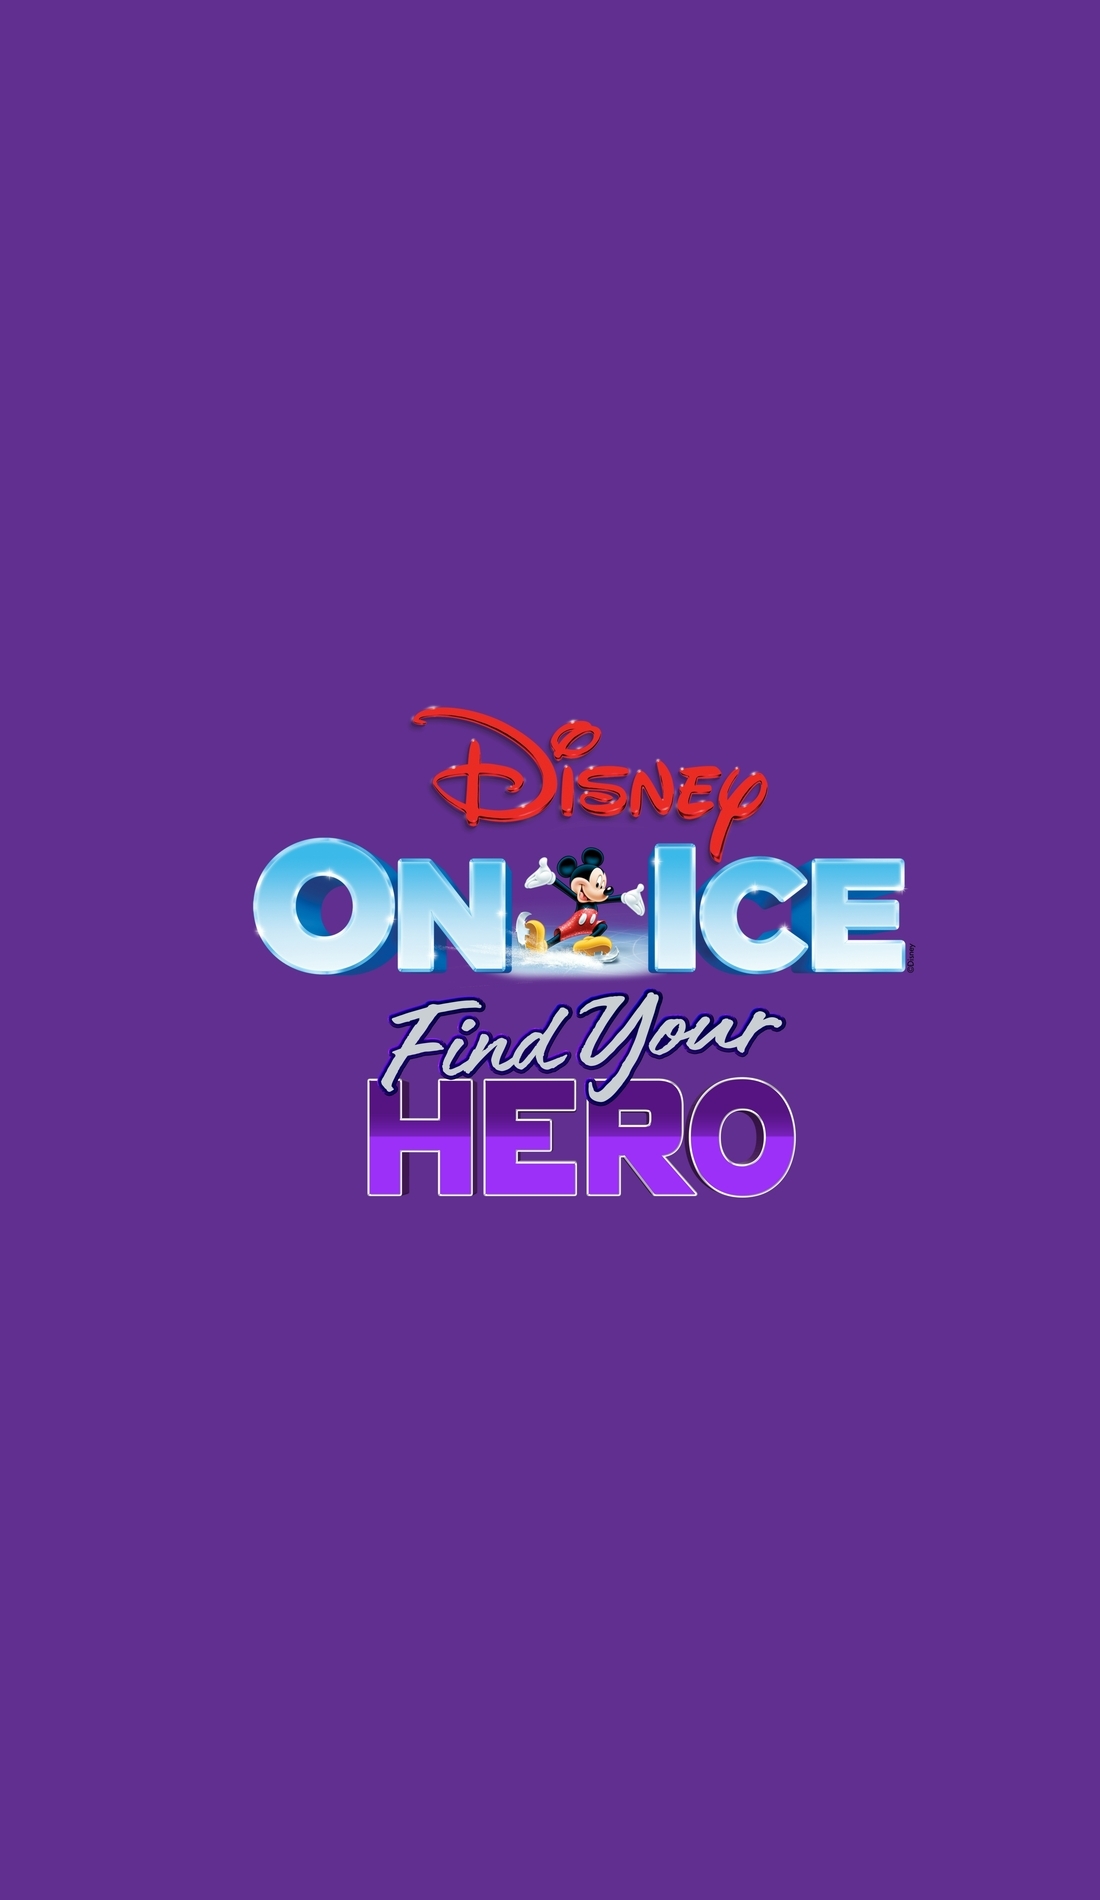 A Disney On Ice: Find Your Hero live event